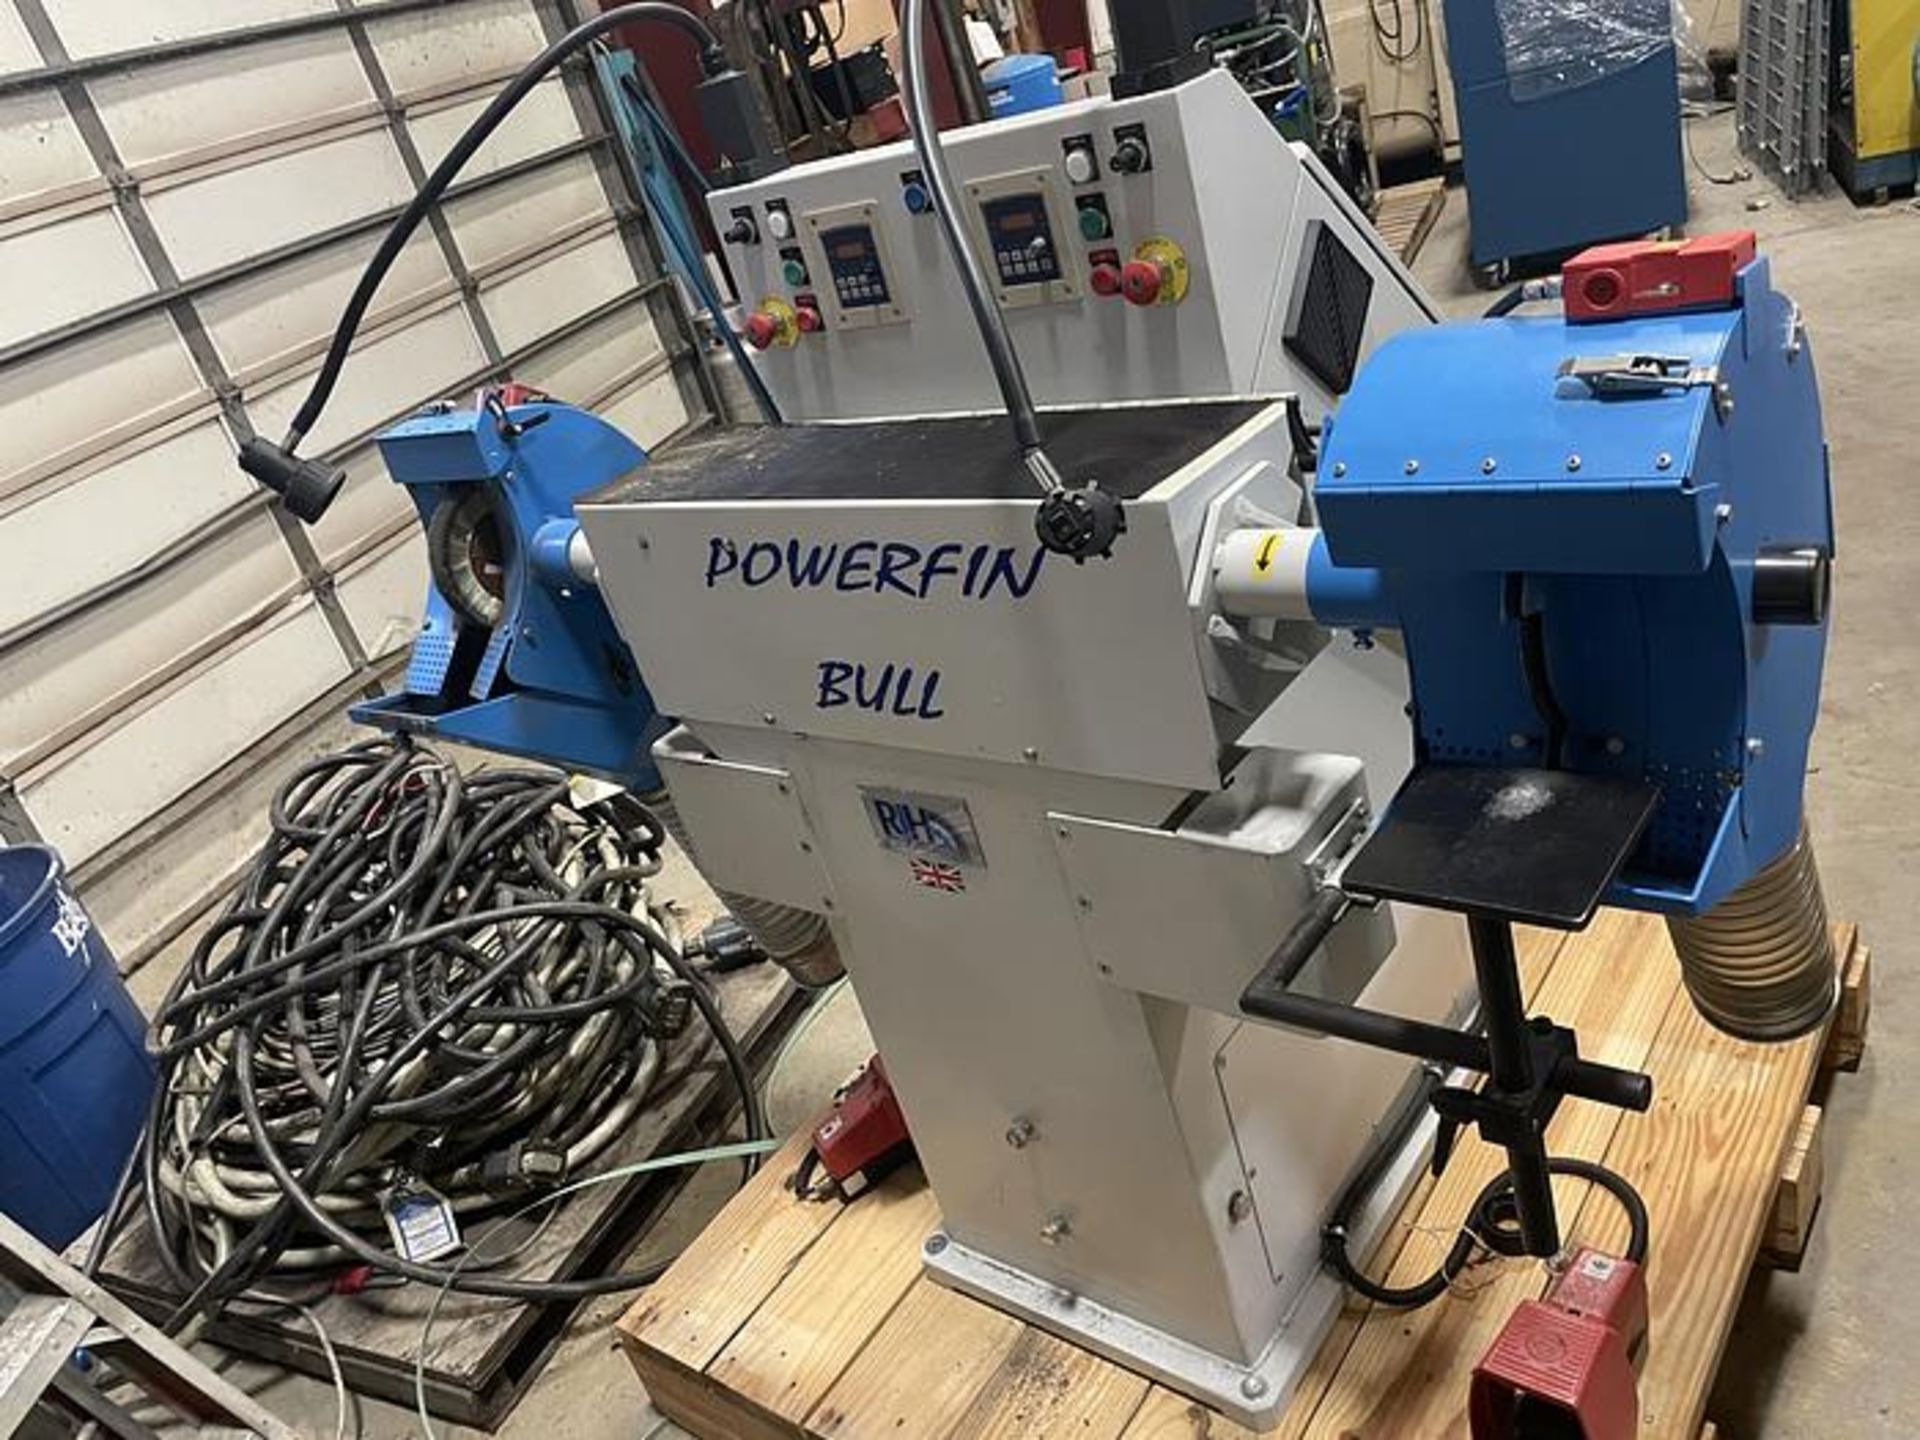 POWERFIN BULL DOUBLE ENDED BUFFING AND POLISHING MACHINE / GRINDER OR CUTOFF, SN 85079 - Image 2 of 11